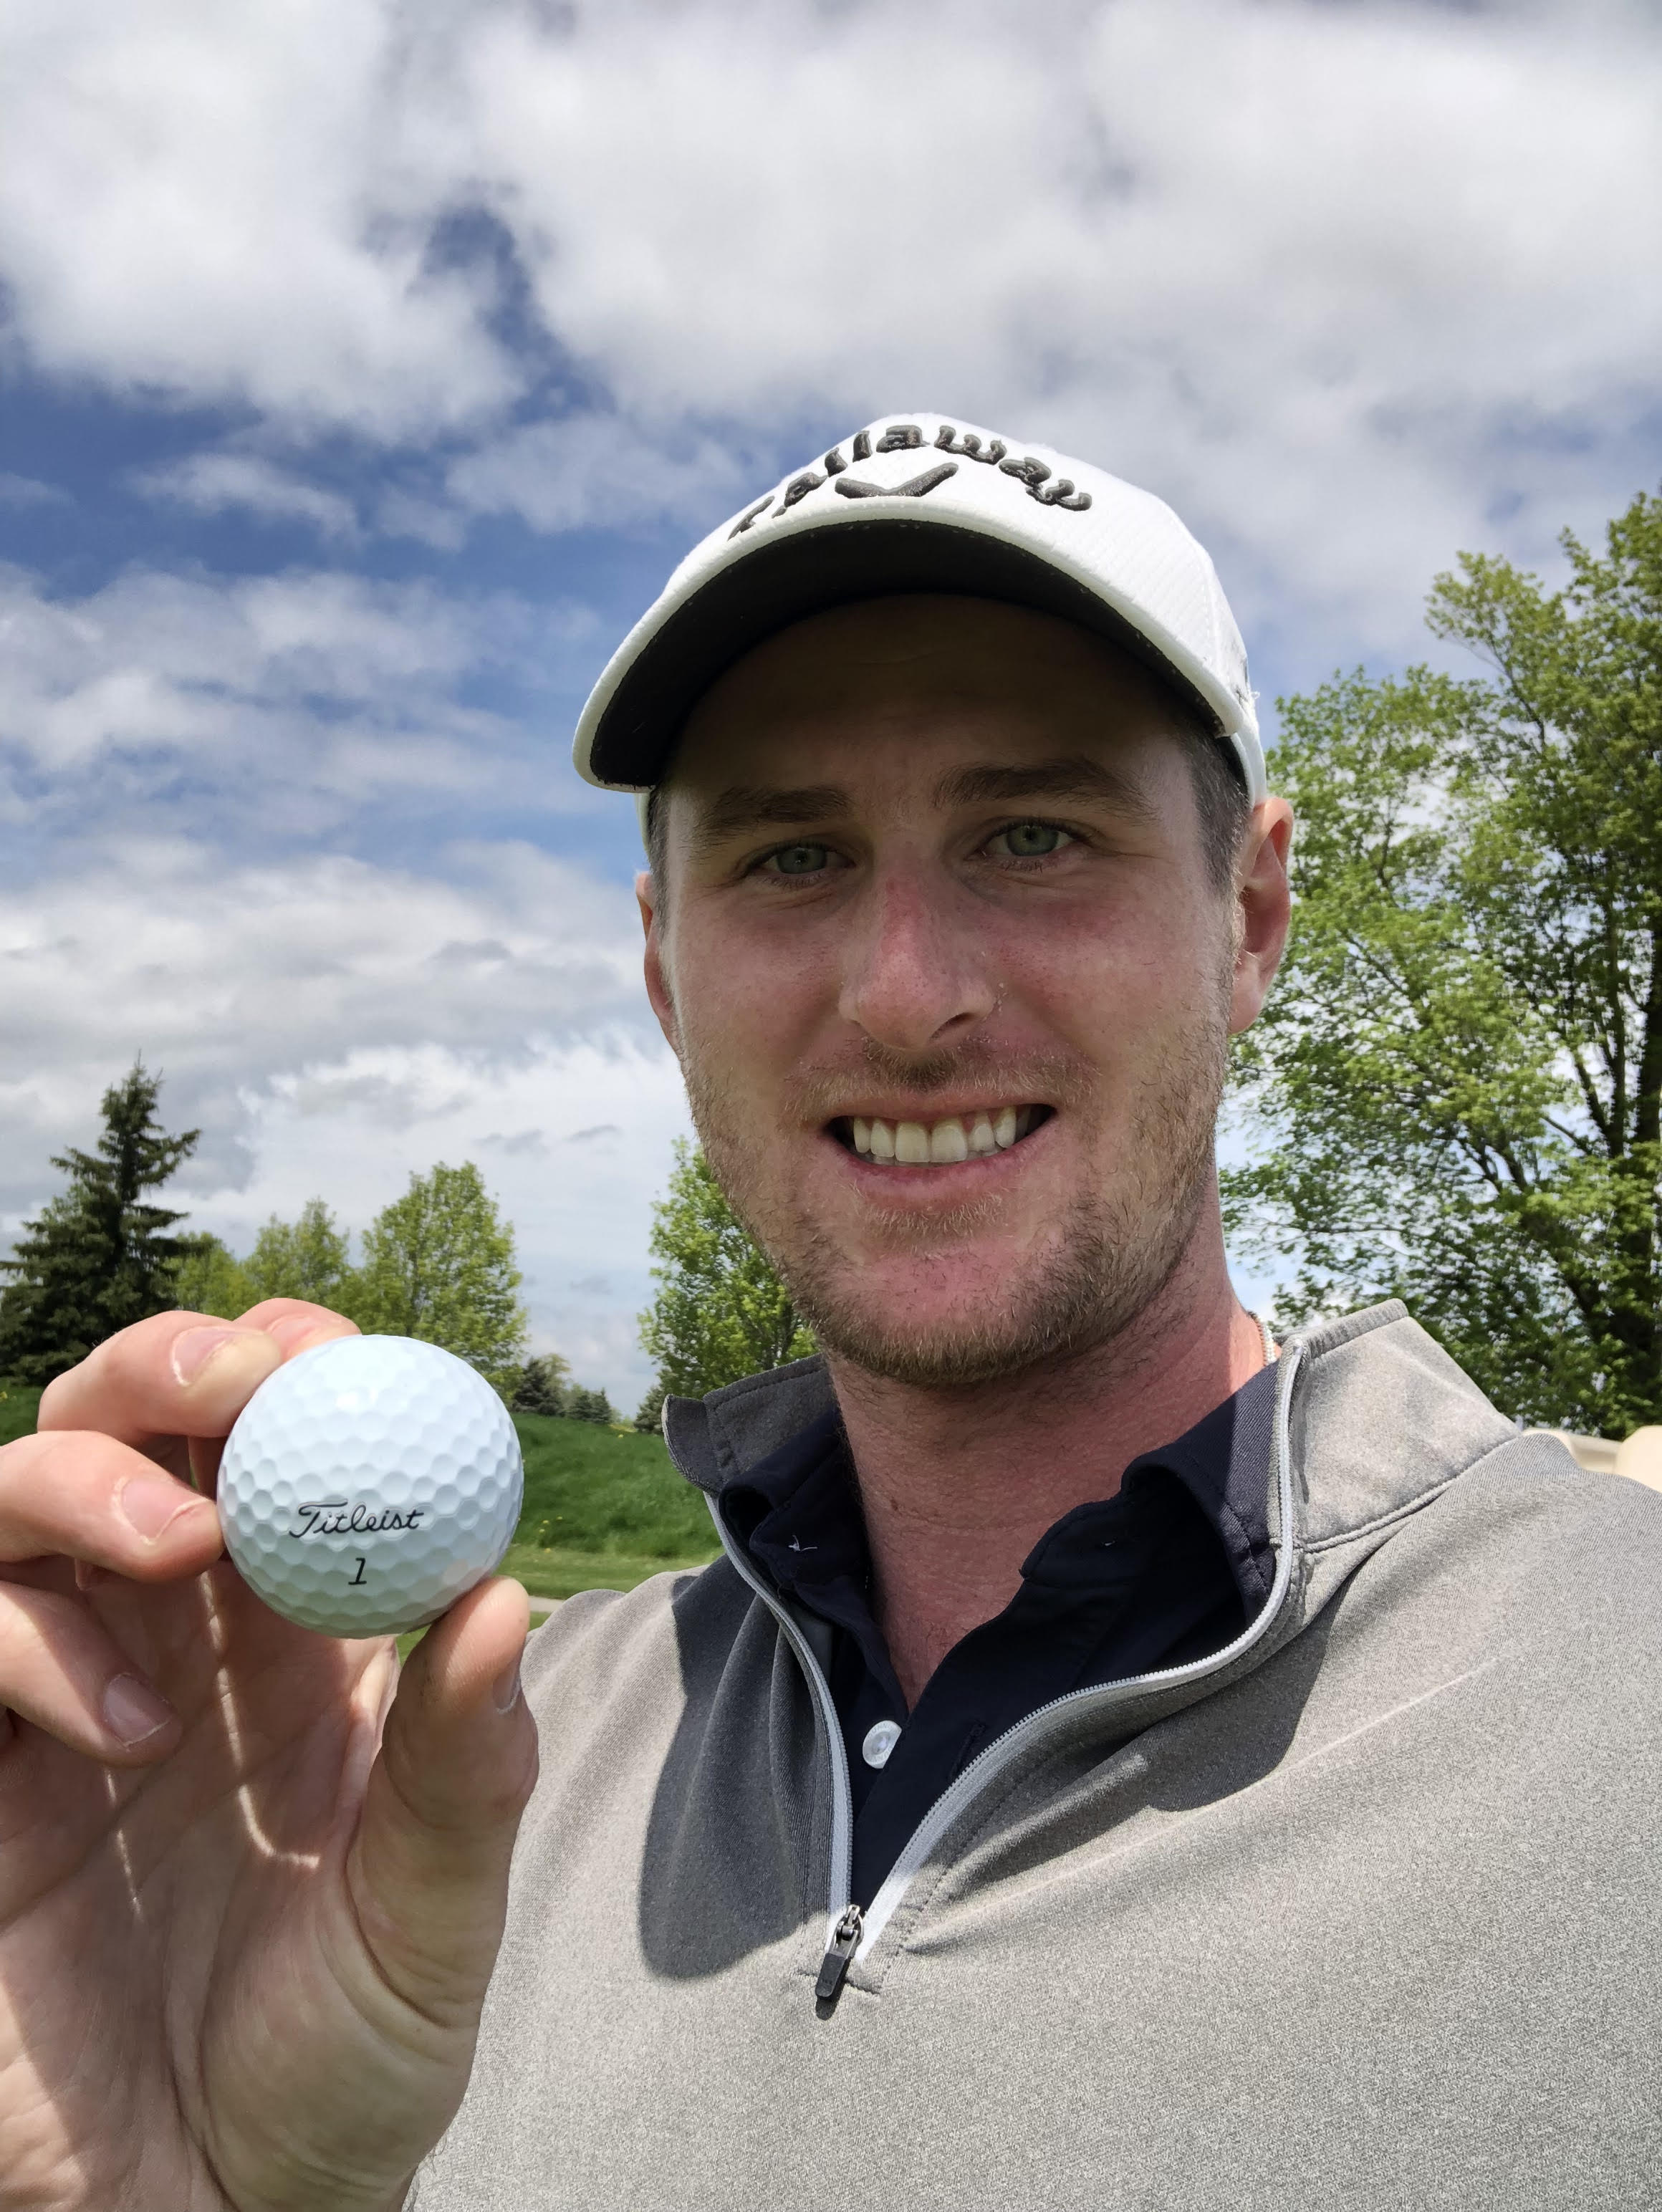 Interview with Oakville’s Zack Creed on golf, business and seizing opportunities